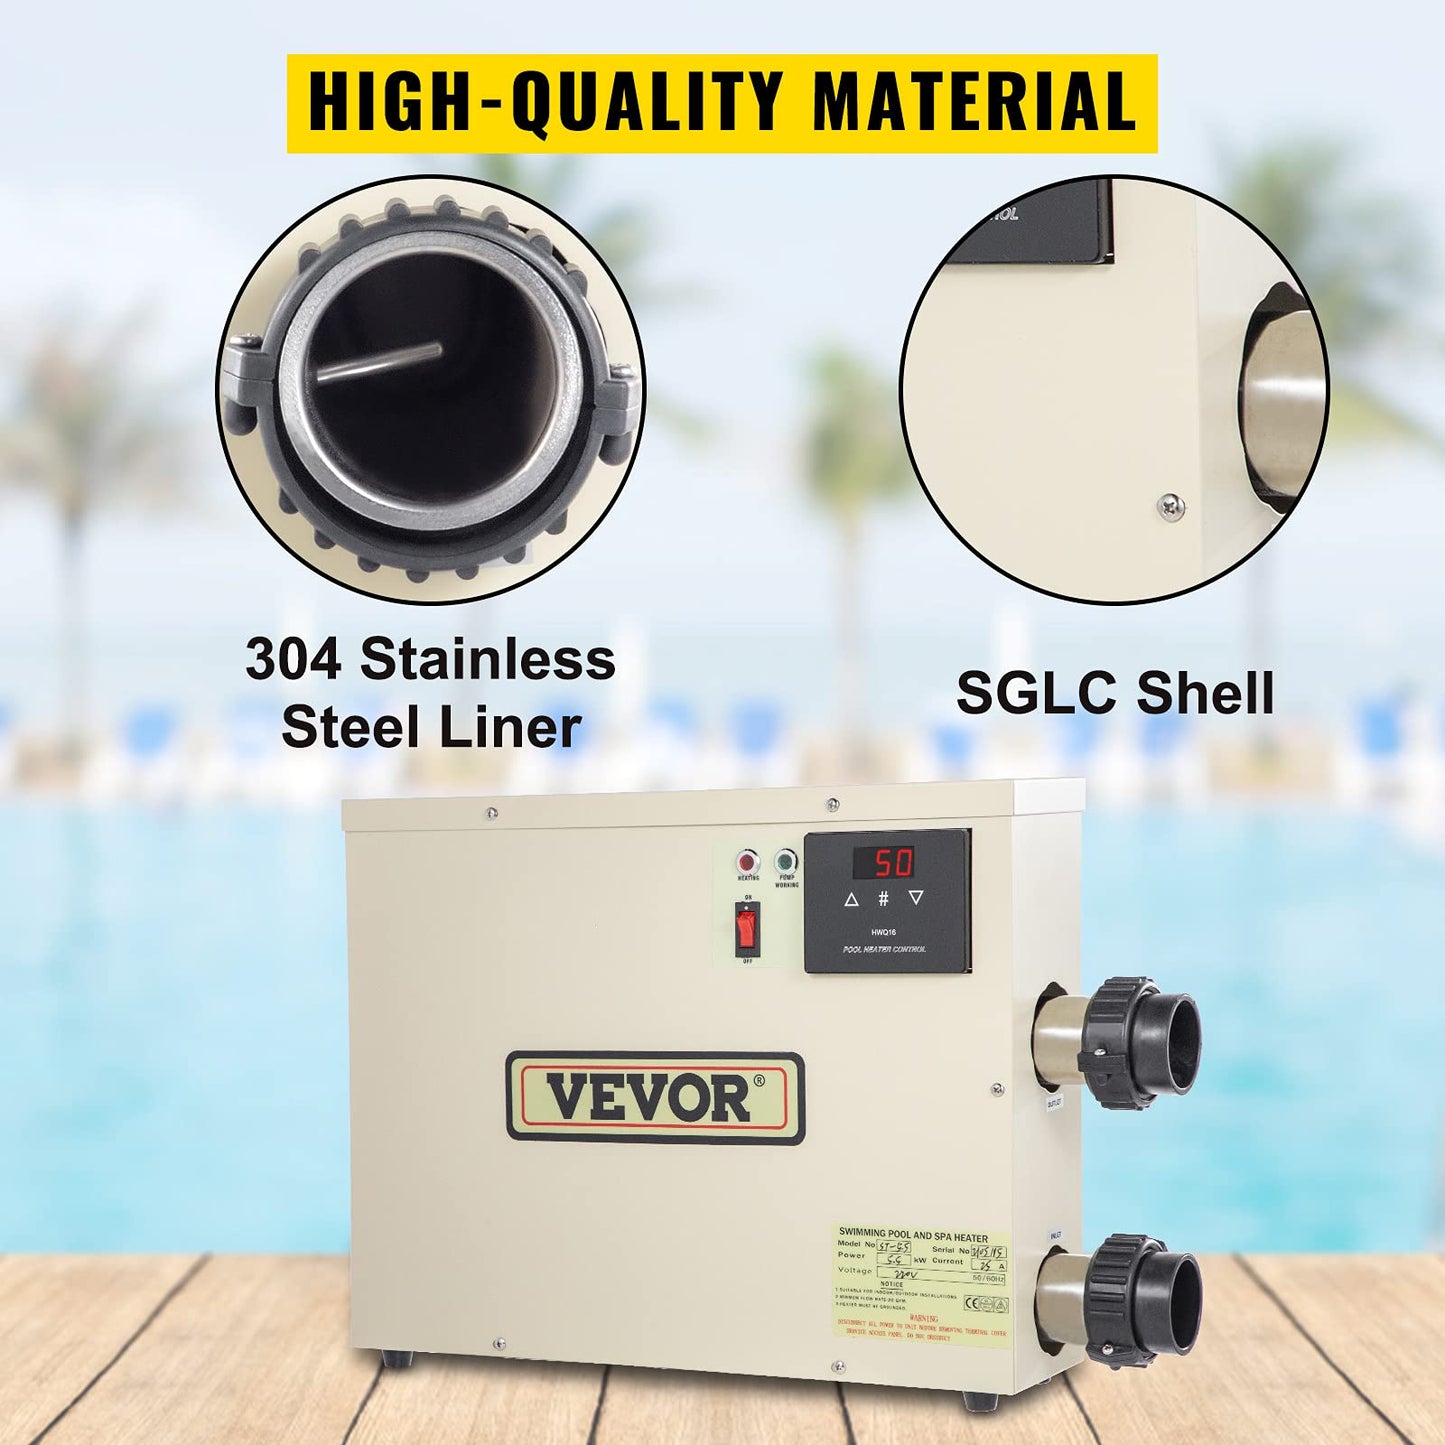 VEVOR Electric SPA Heater 9KW 240V 50-60HZ Digital SPA Water Heater with Adjustable Temperature Controller Heater for Swimming Pool and Hot Bathtubs Self Modulating Pool SPA Heater with CE